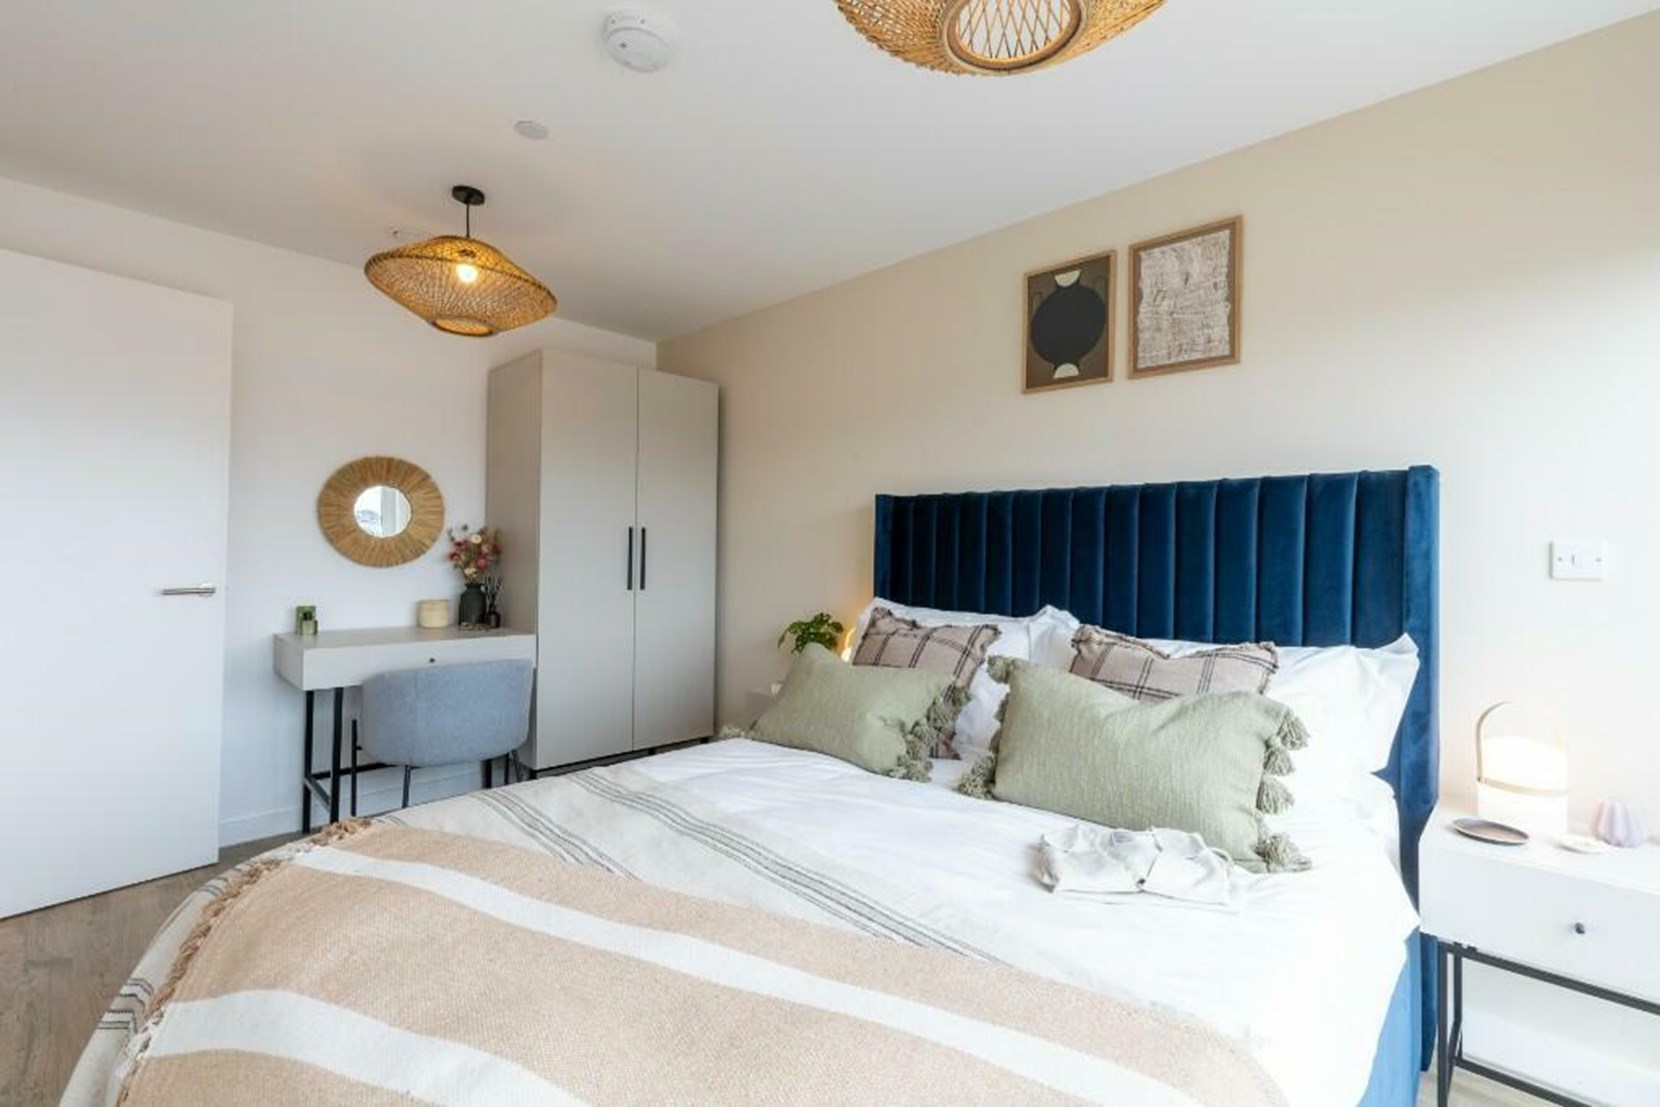 Apartments to Rent by ila at Hairpin House, Birmingham, B12, bedroom